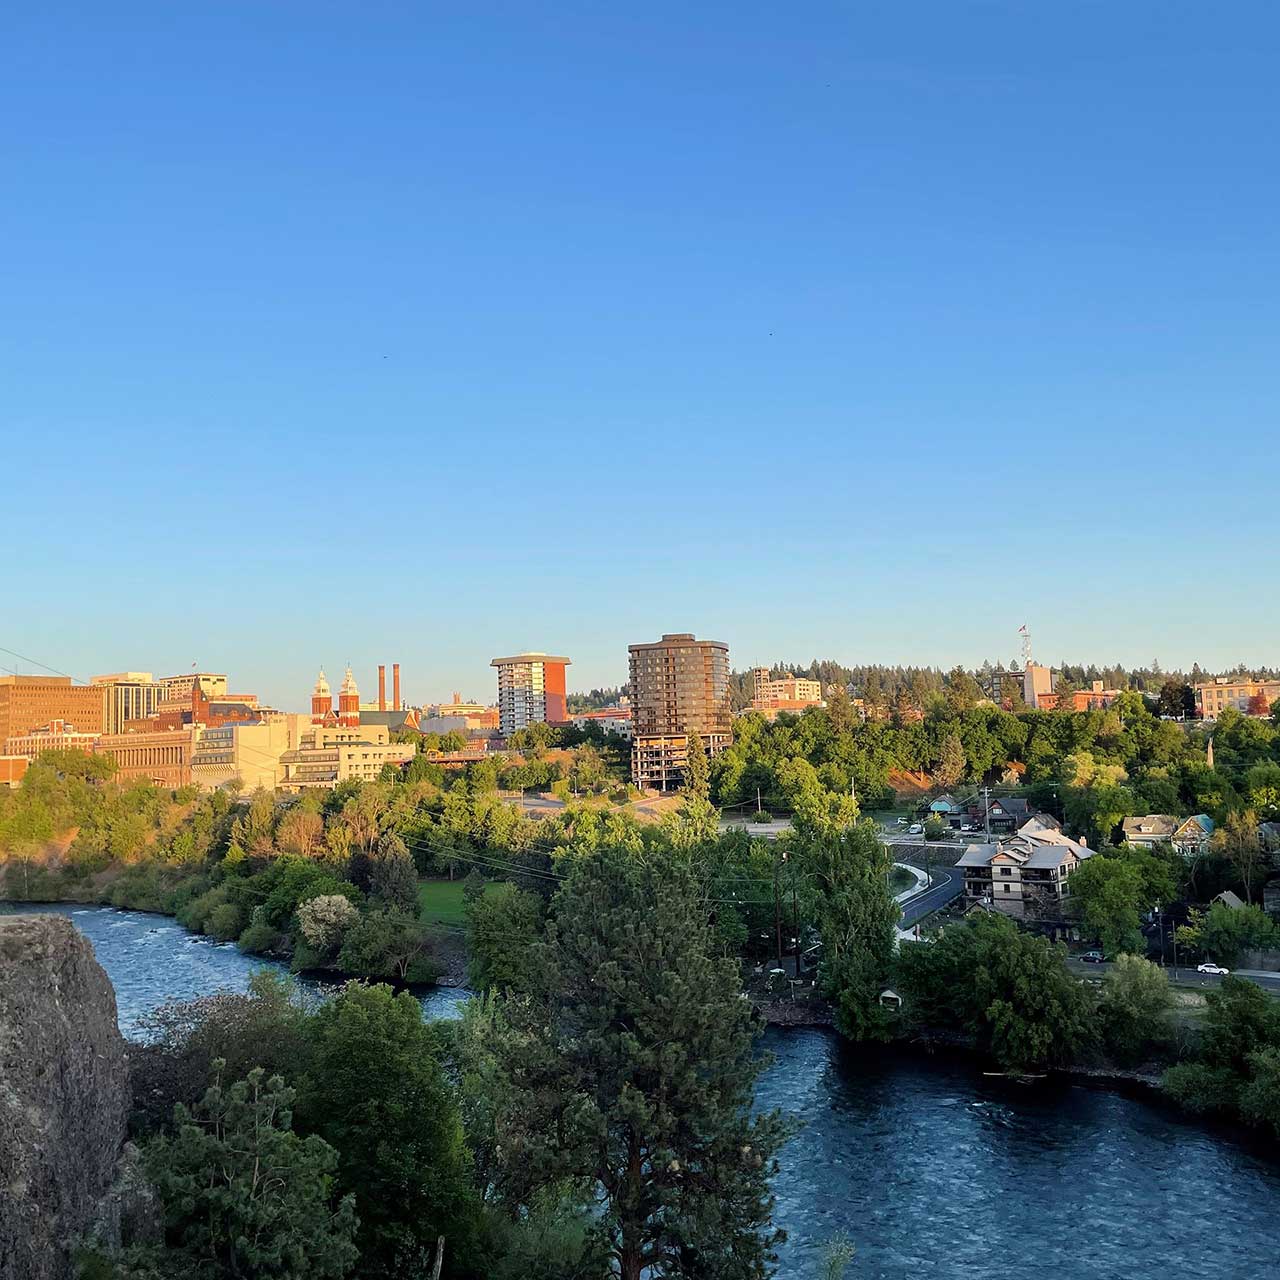 View of Downtown Spokane and Spokane River at Sunset